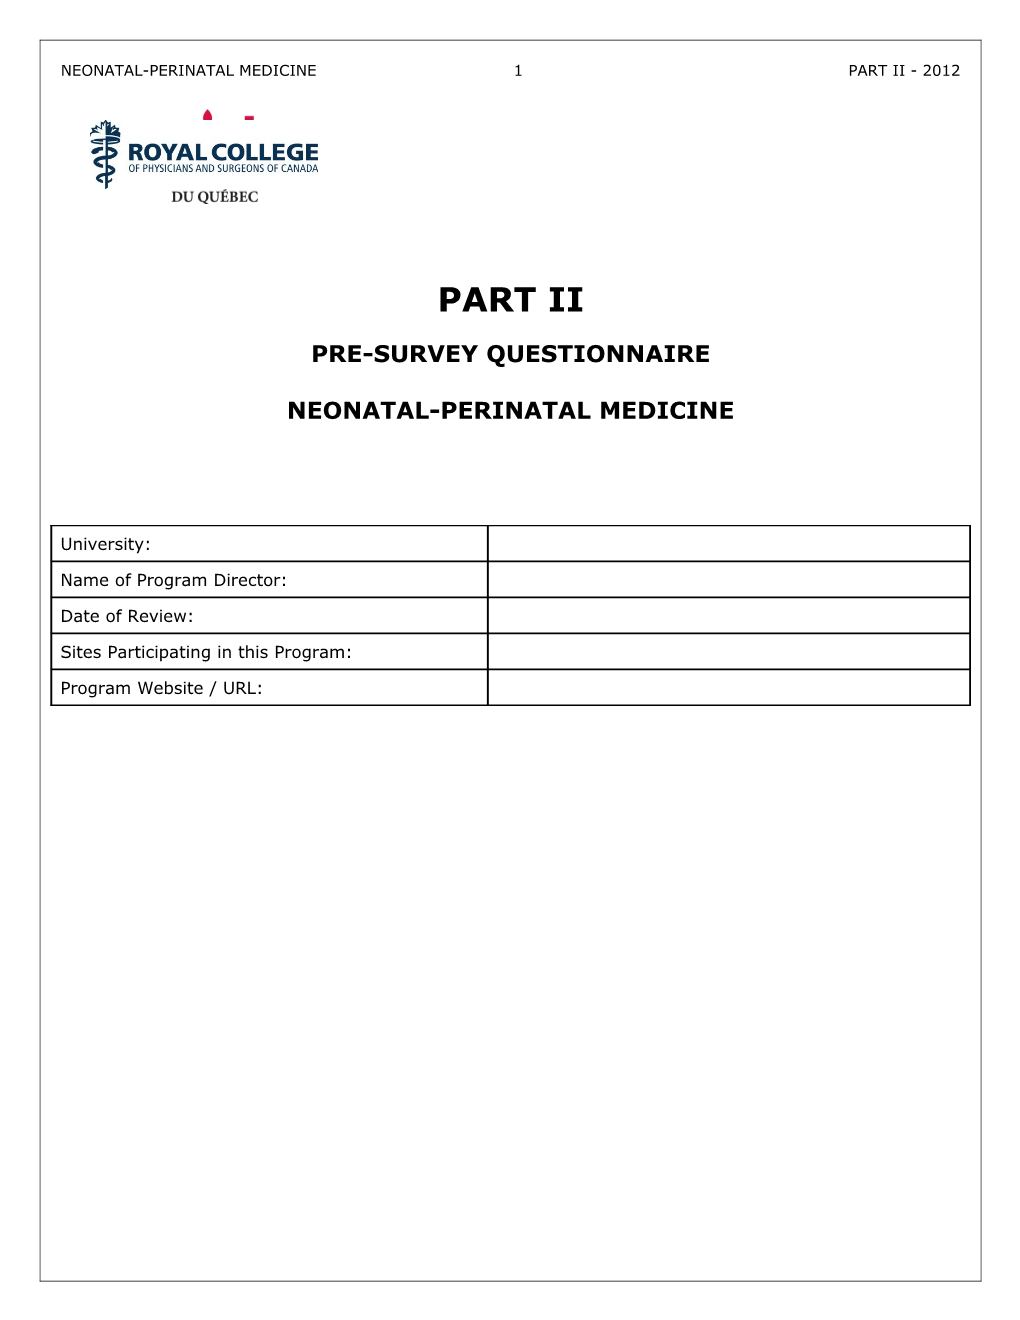 Anesthesia Questionnaire Short Version s2